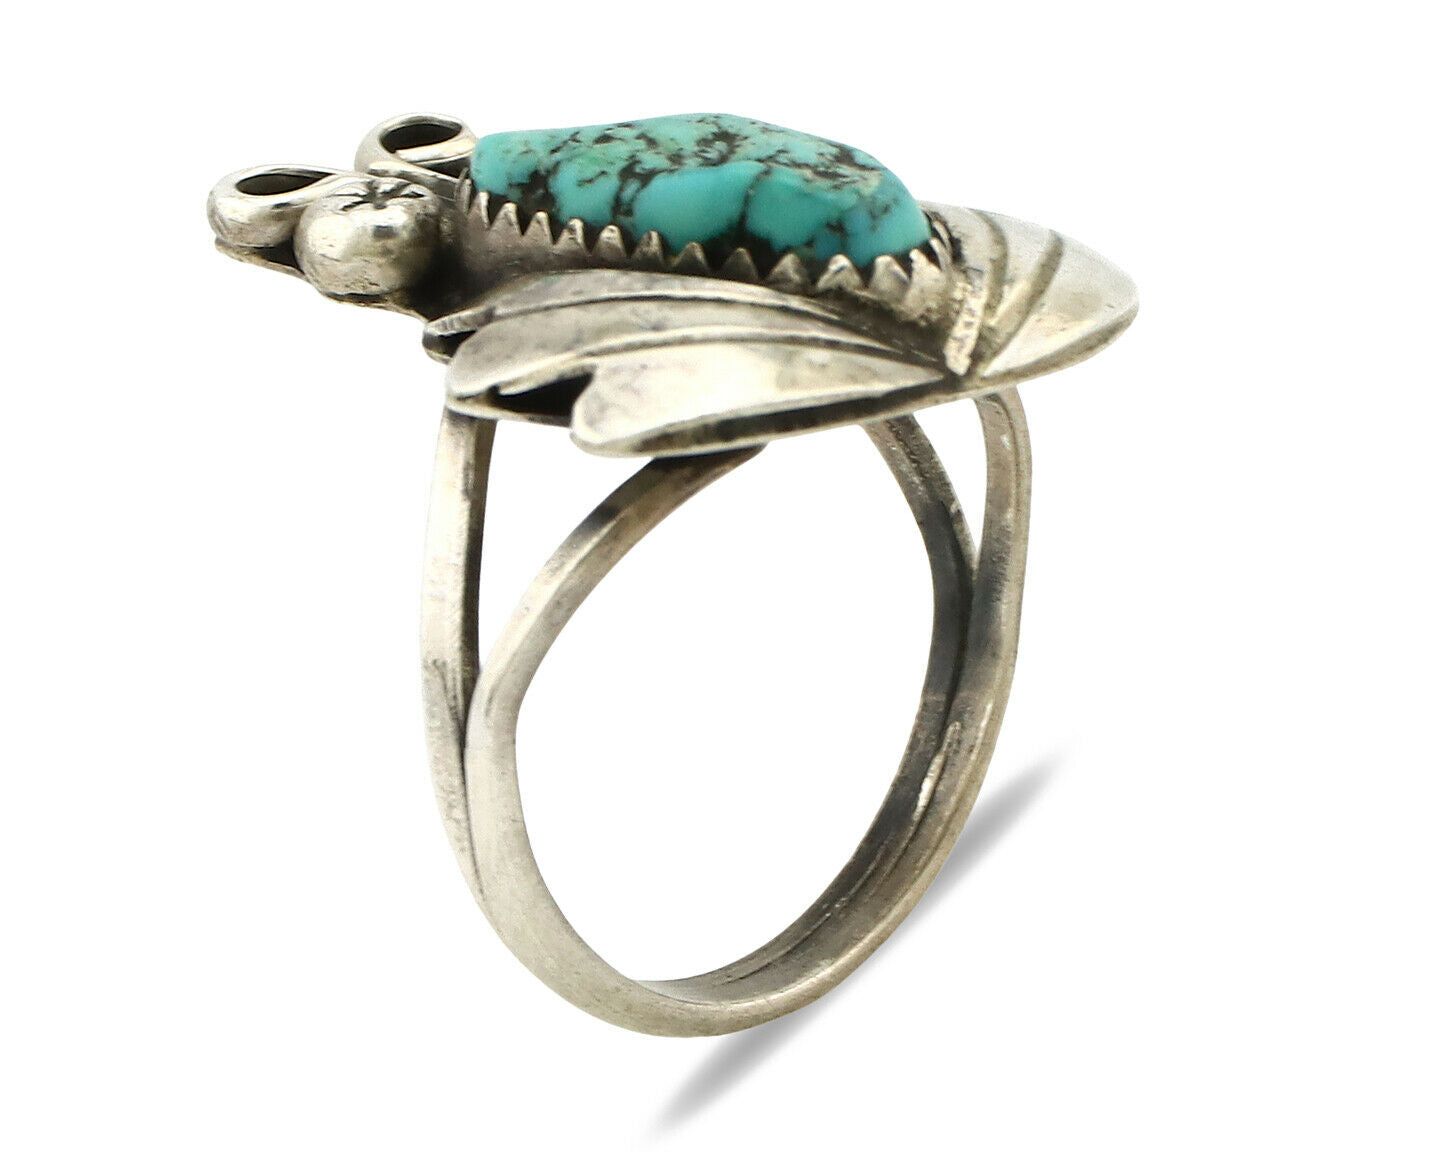 Navajo Ring .925 Silver Sleeping Beauty Turquoise Native Artist C.1980's